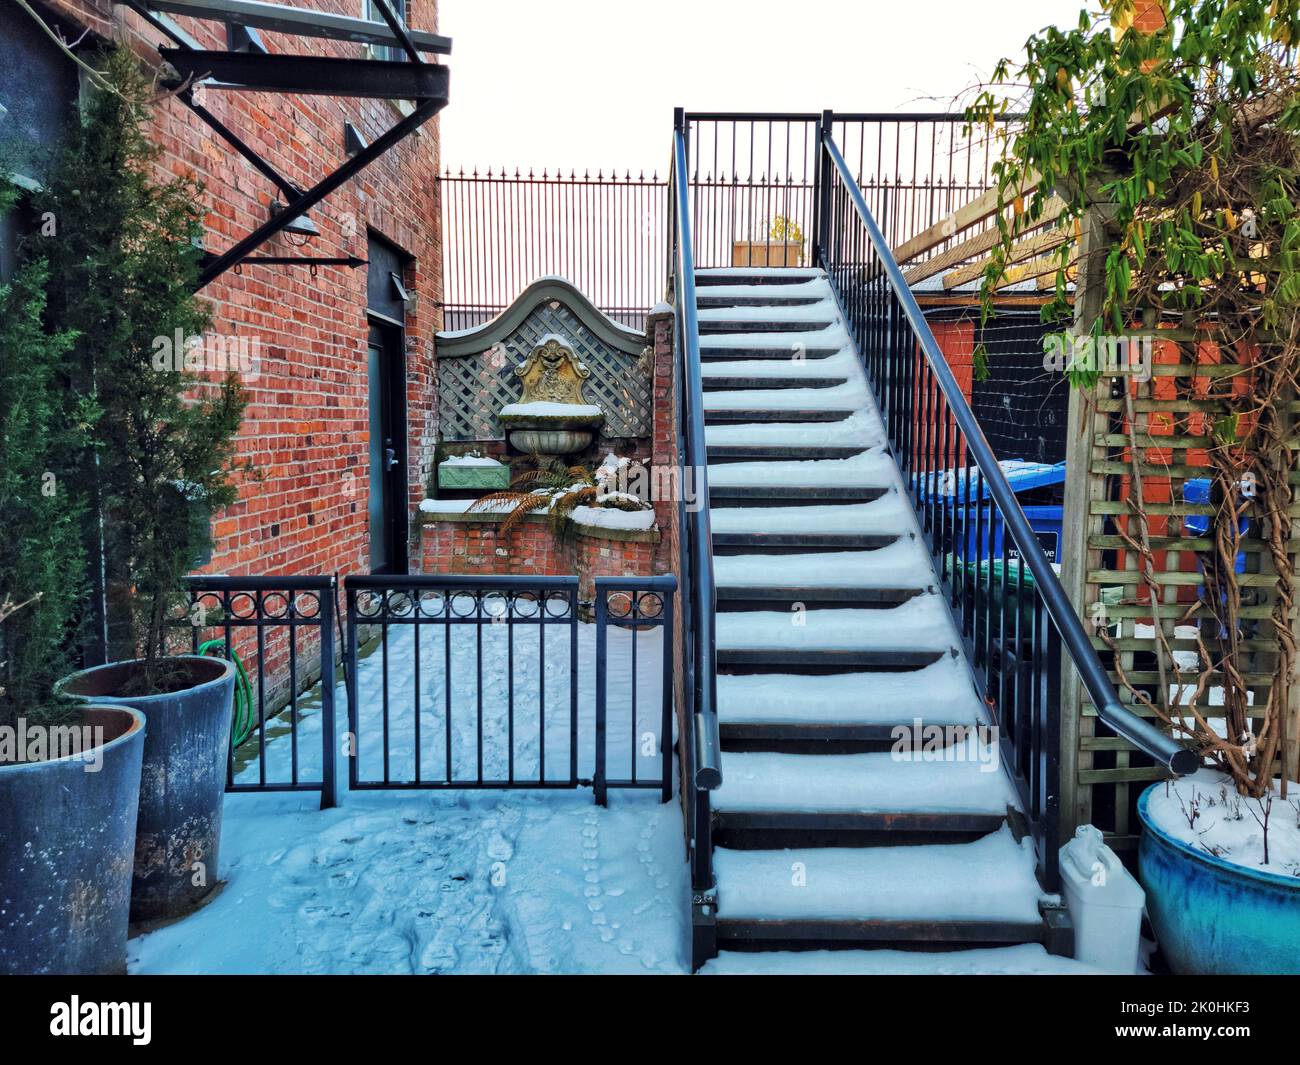 A metal stairway covered in snow in the backyard leading to house Stock Photo